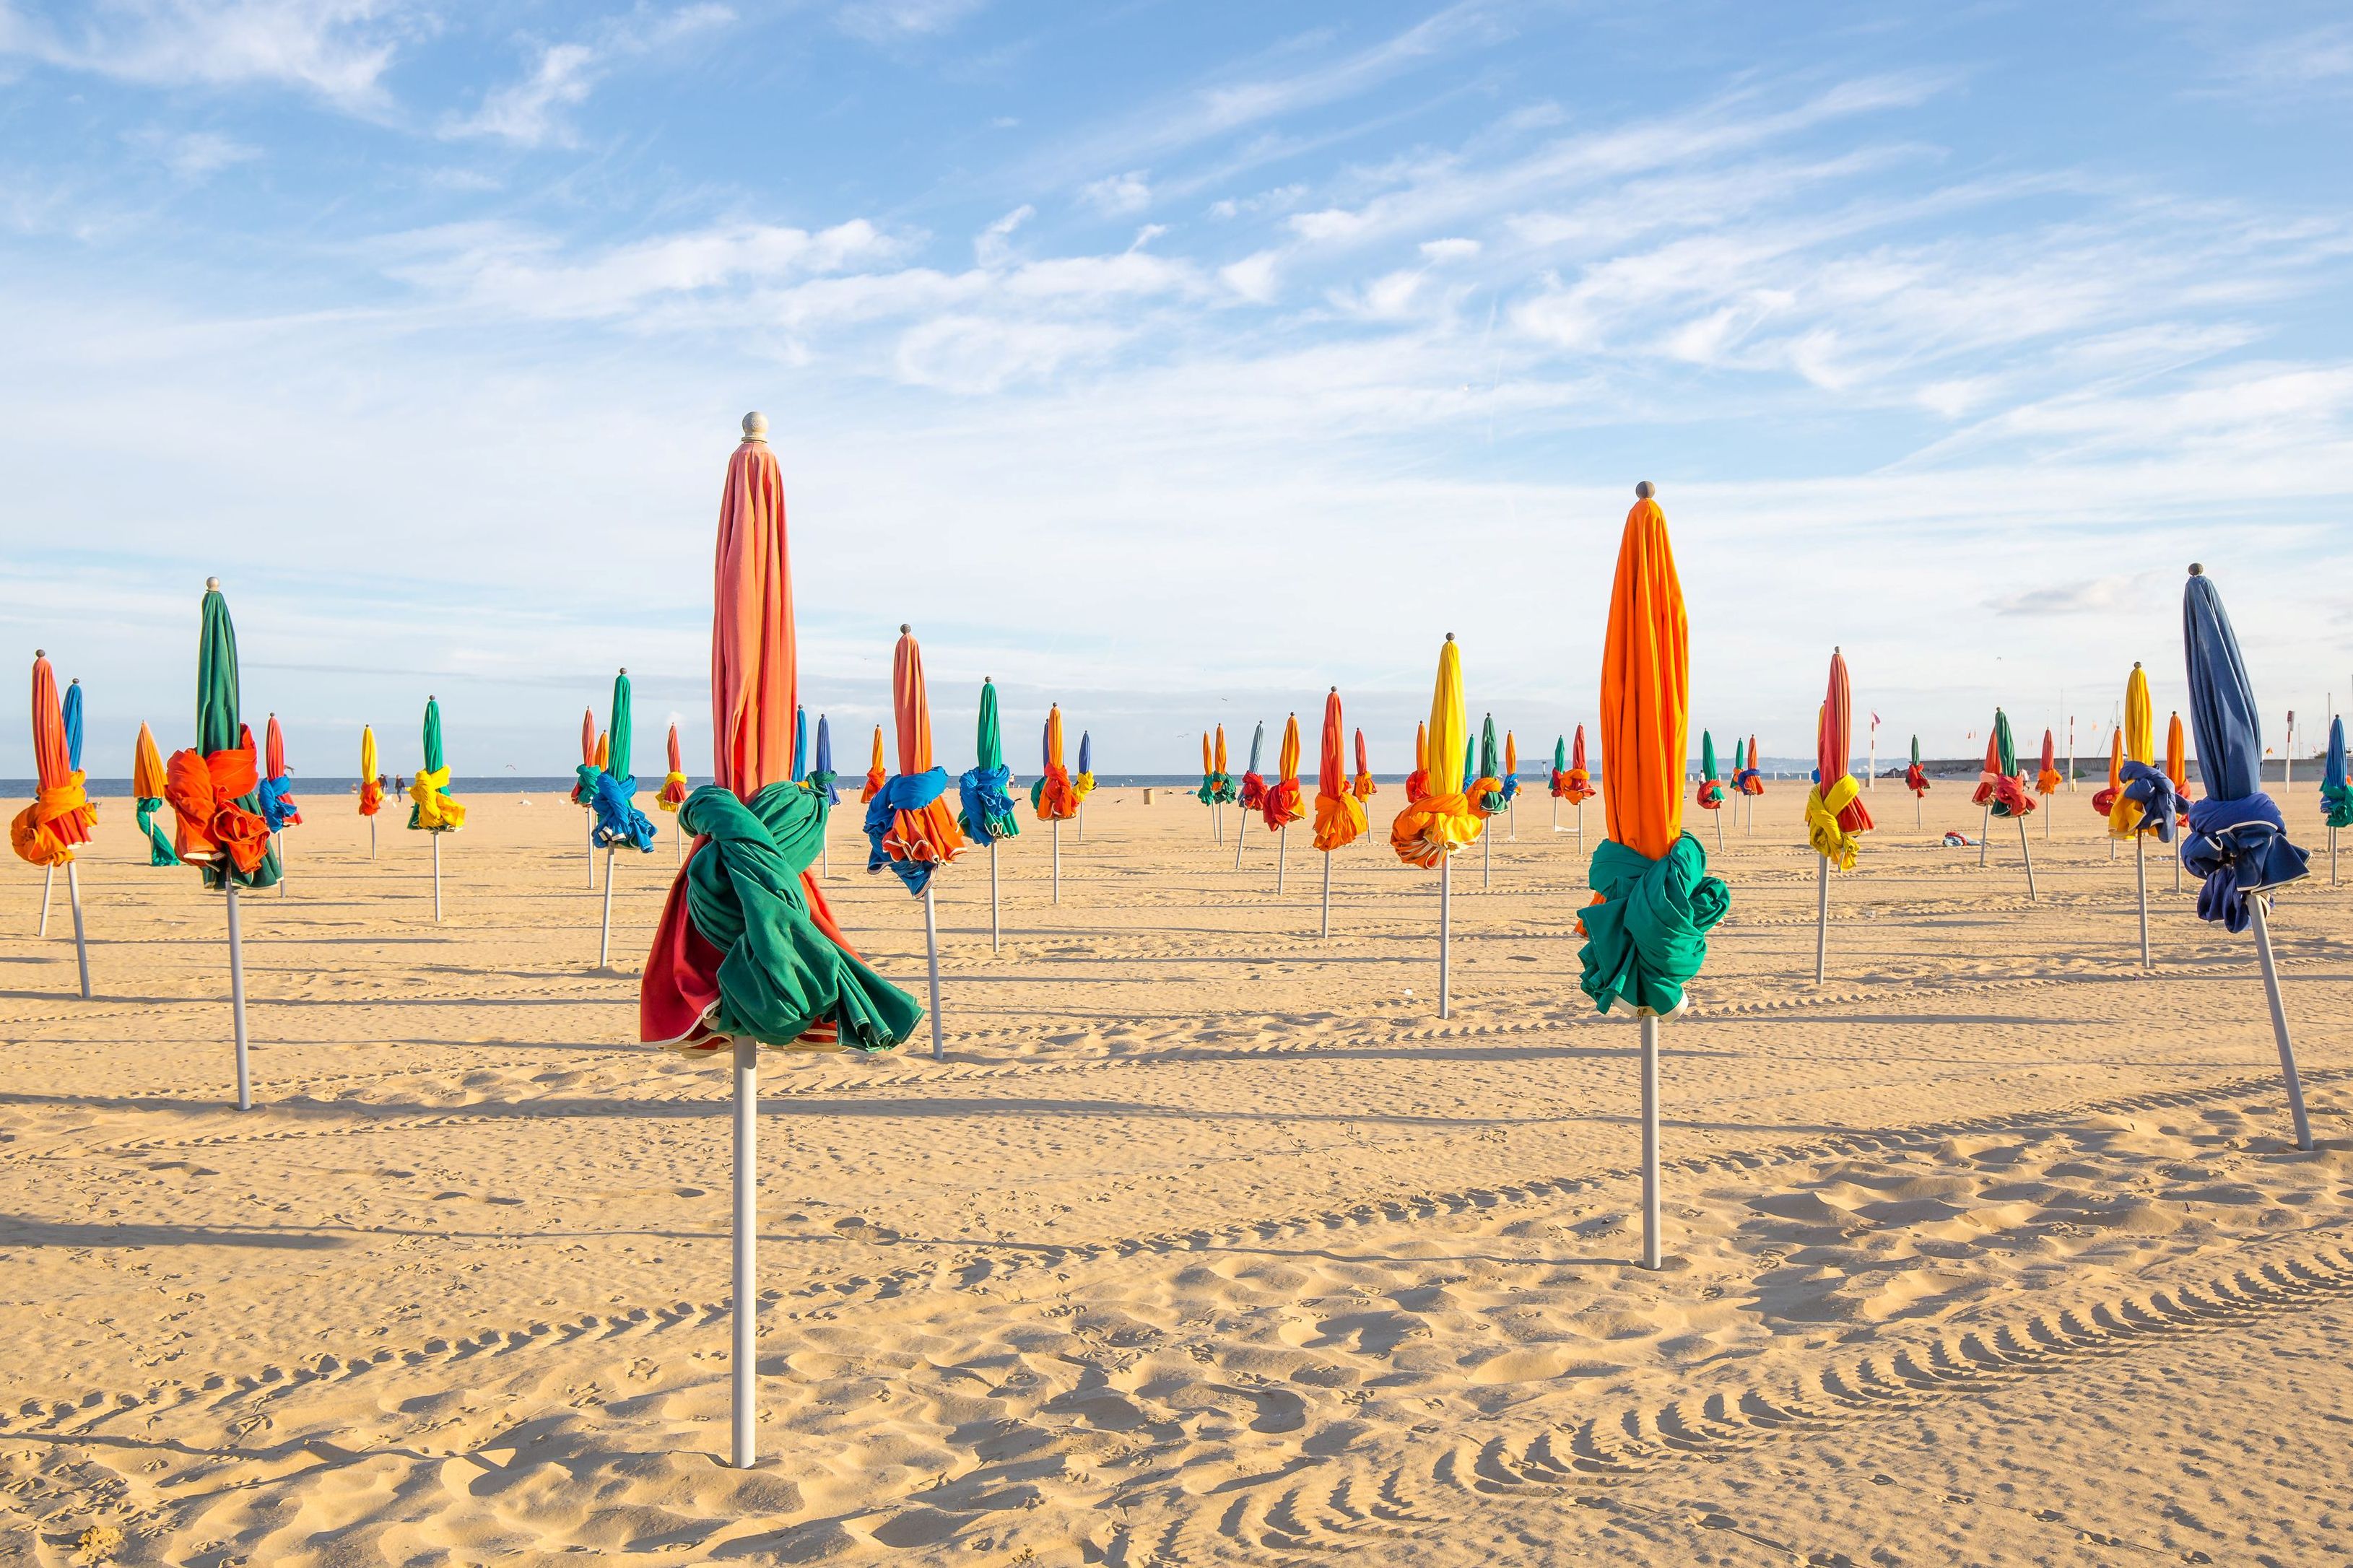 the-famous-colorful-parasols-on-deauville-beach--normandy--northern-france--europe-991924534-5b462d7746e0fb005bfb3f99.jpg